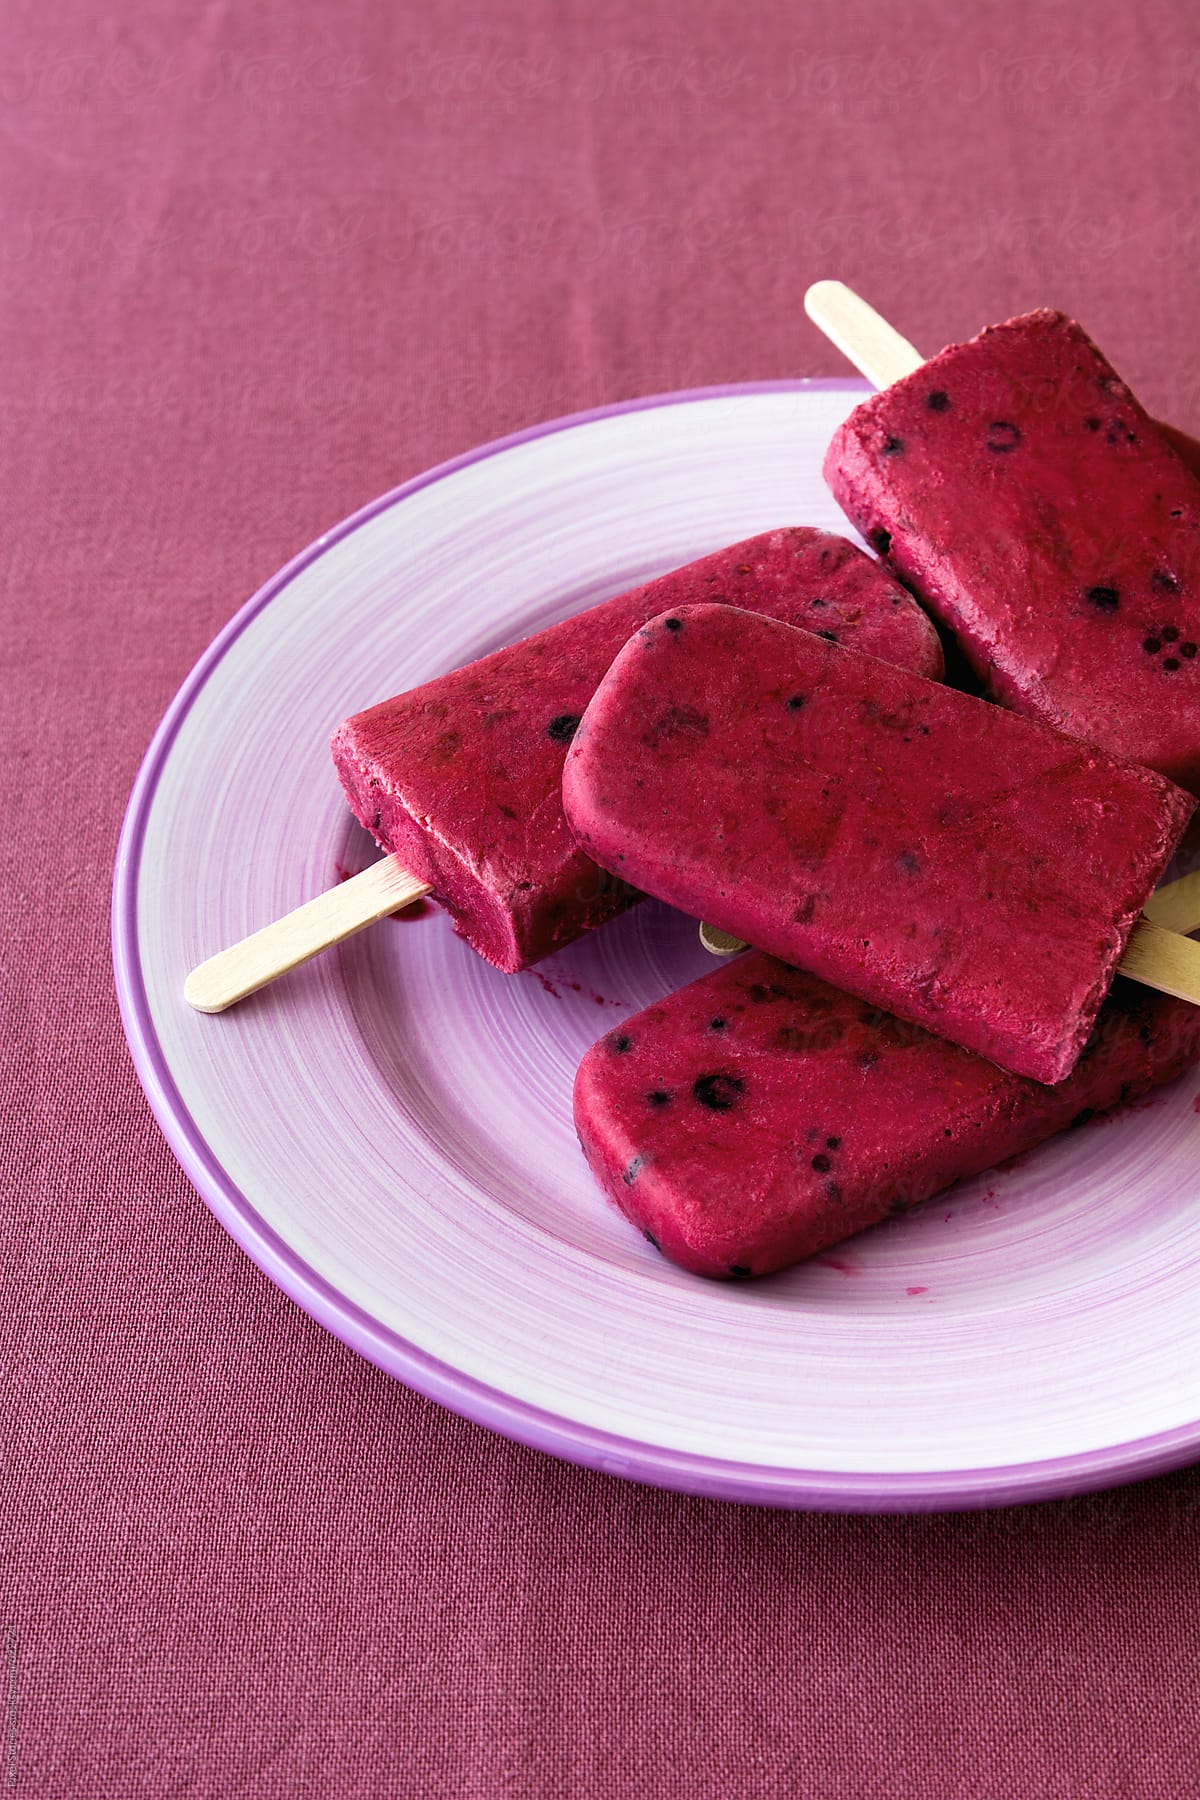 Homemade forest fruits ice pops